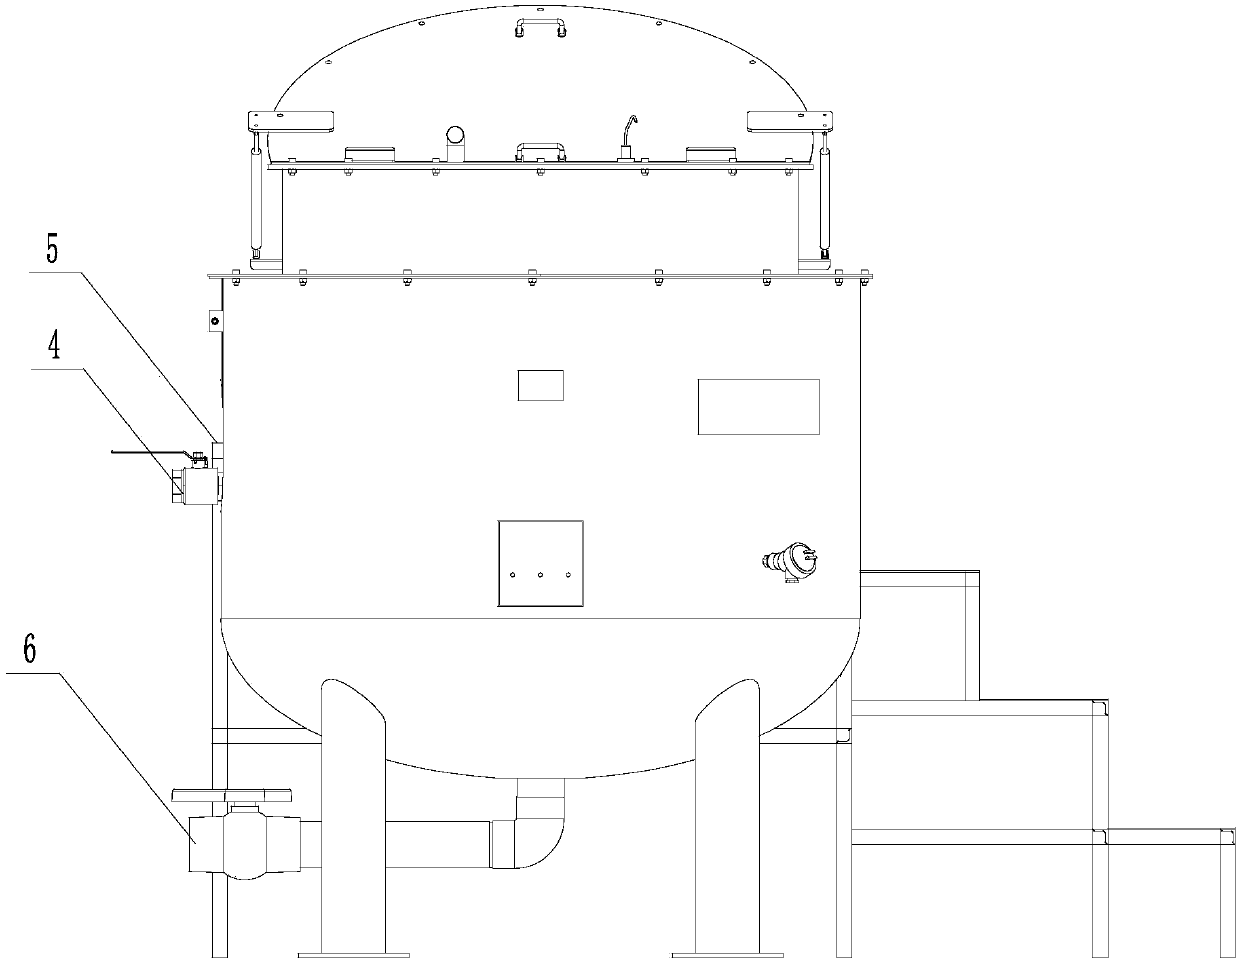 Equipment for purifying oil with far-infrared radiation heat transfer